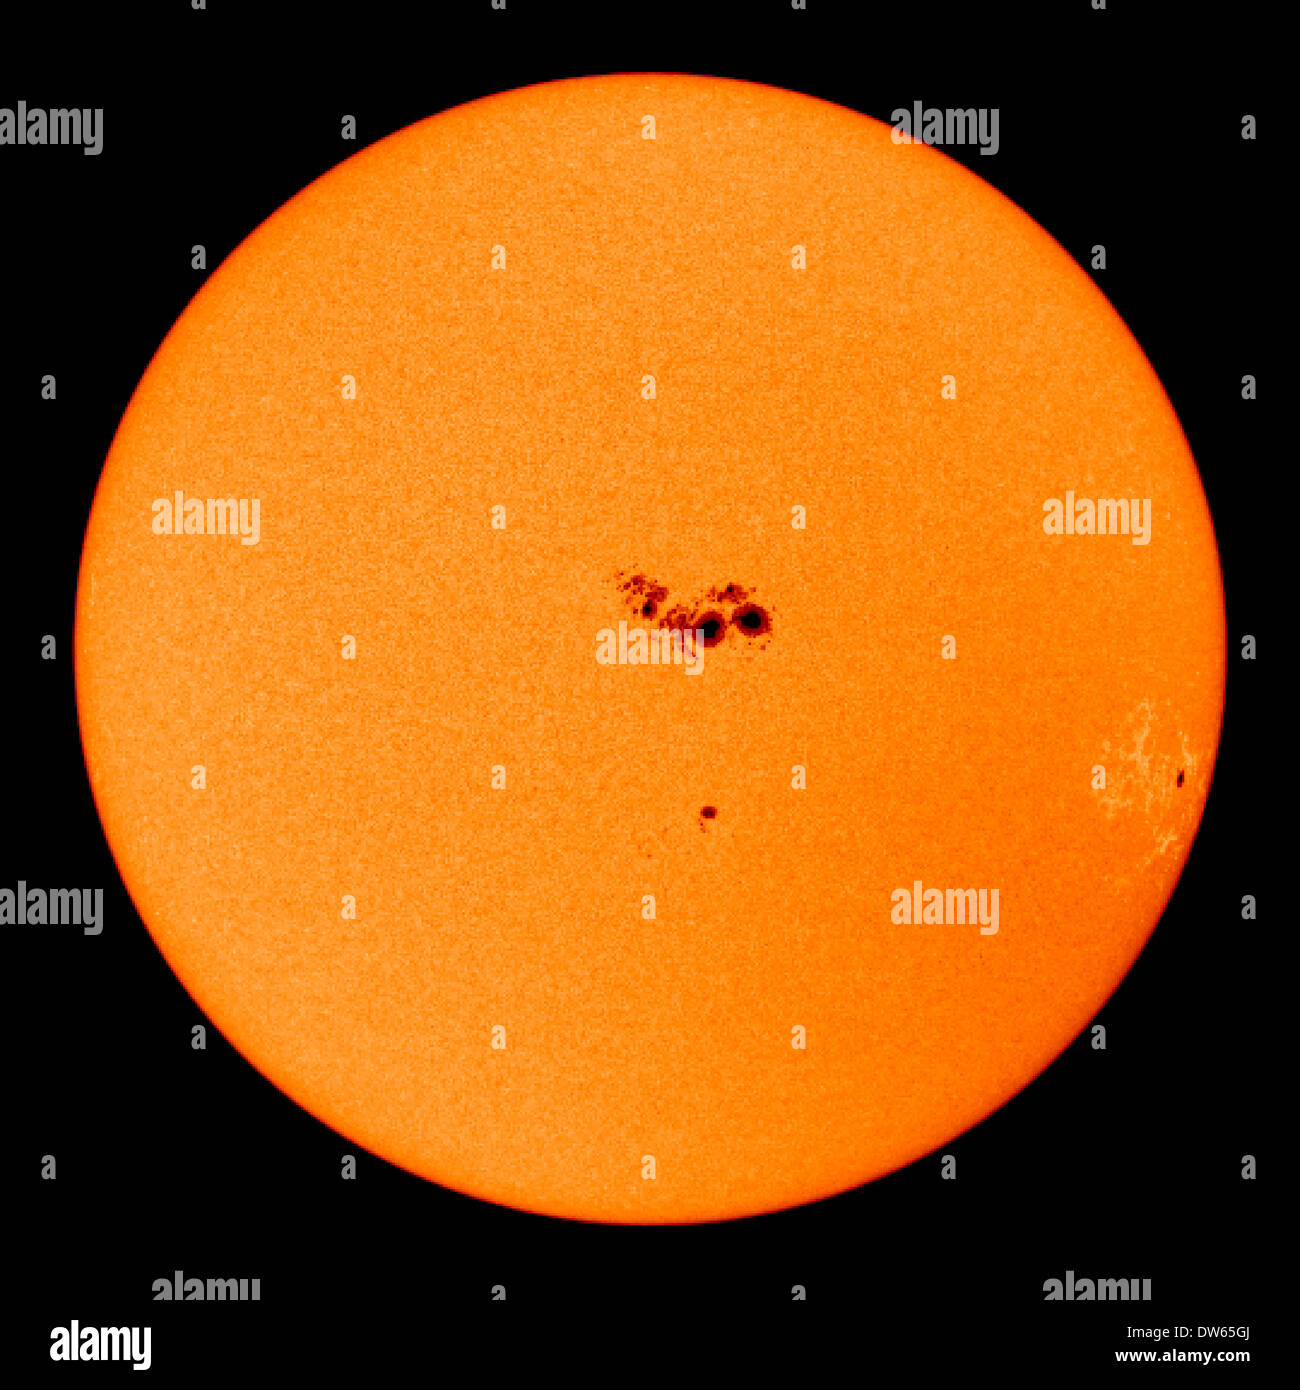 A large sunspot 20 times the size of the earth. Stock Photo